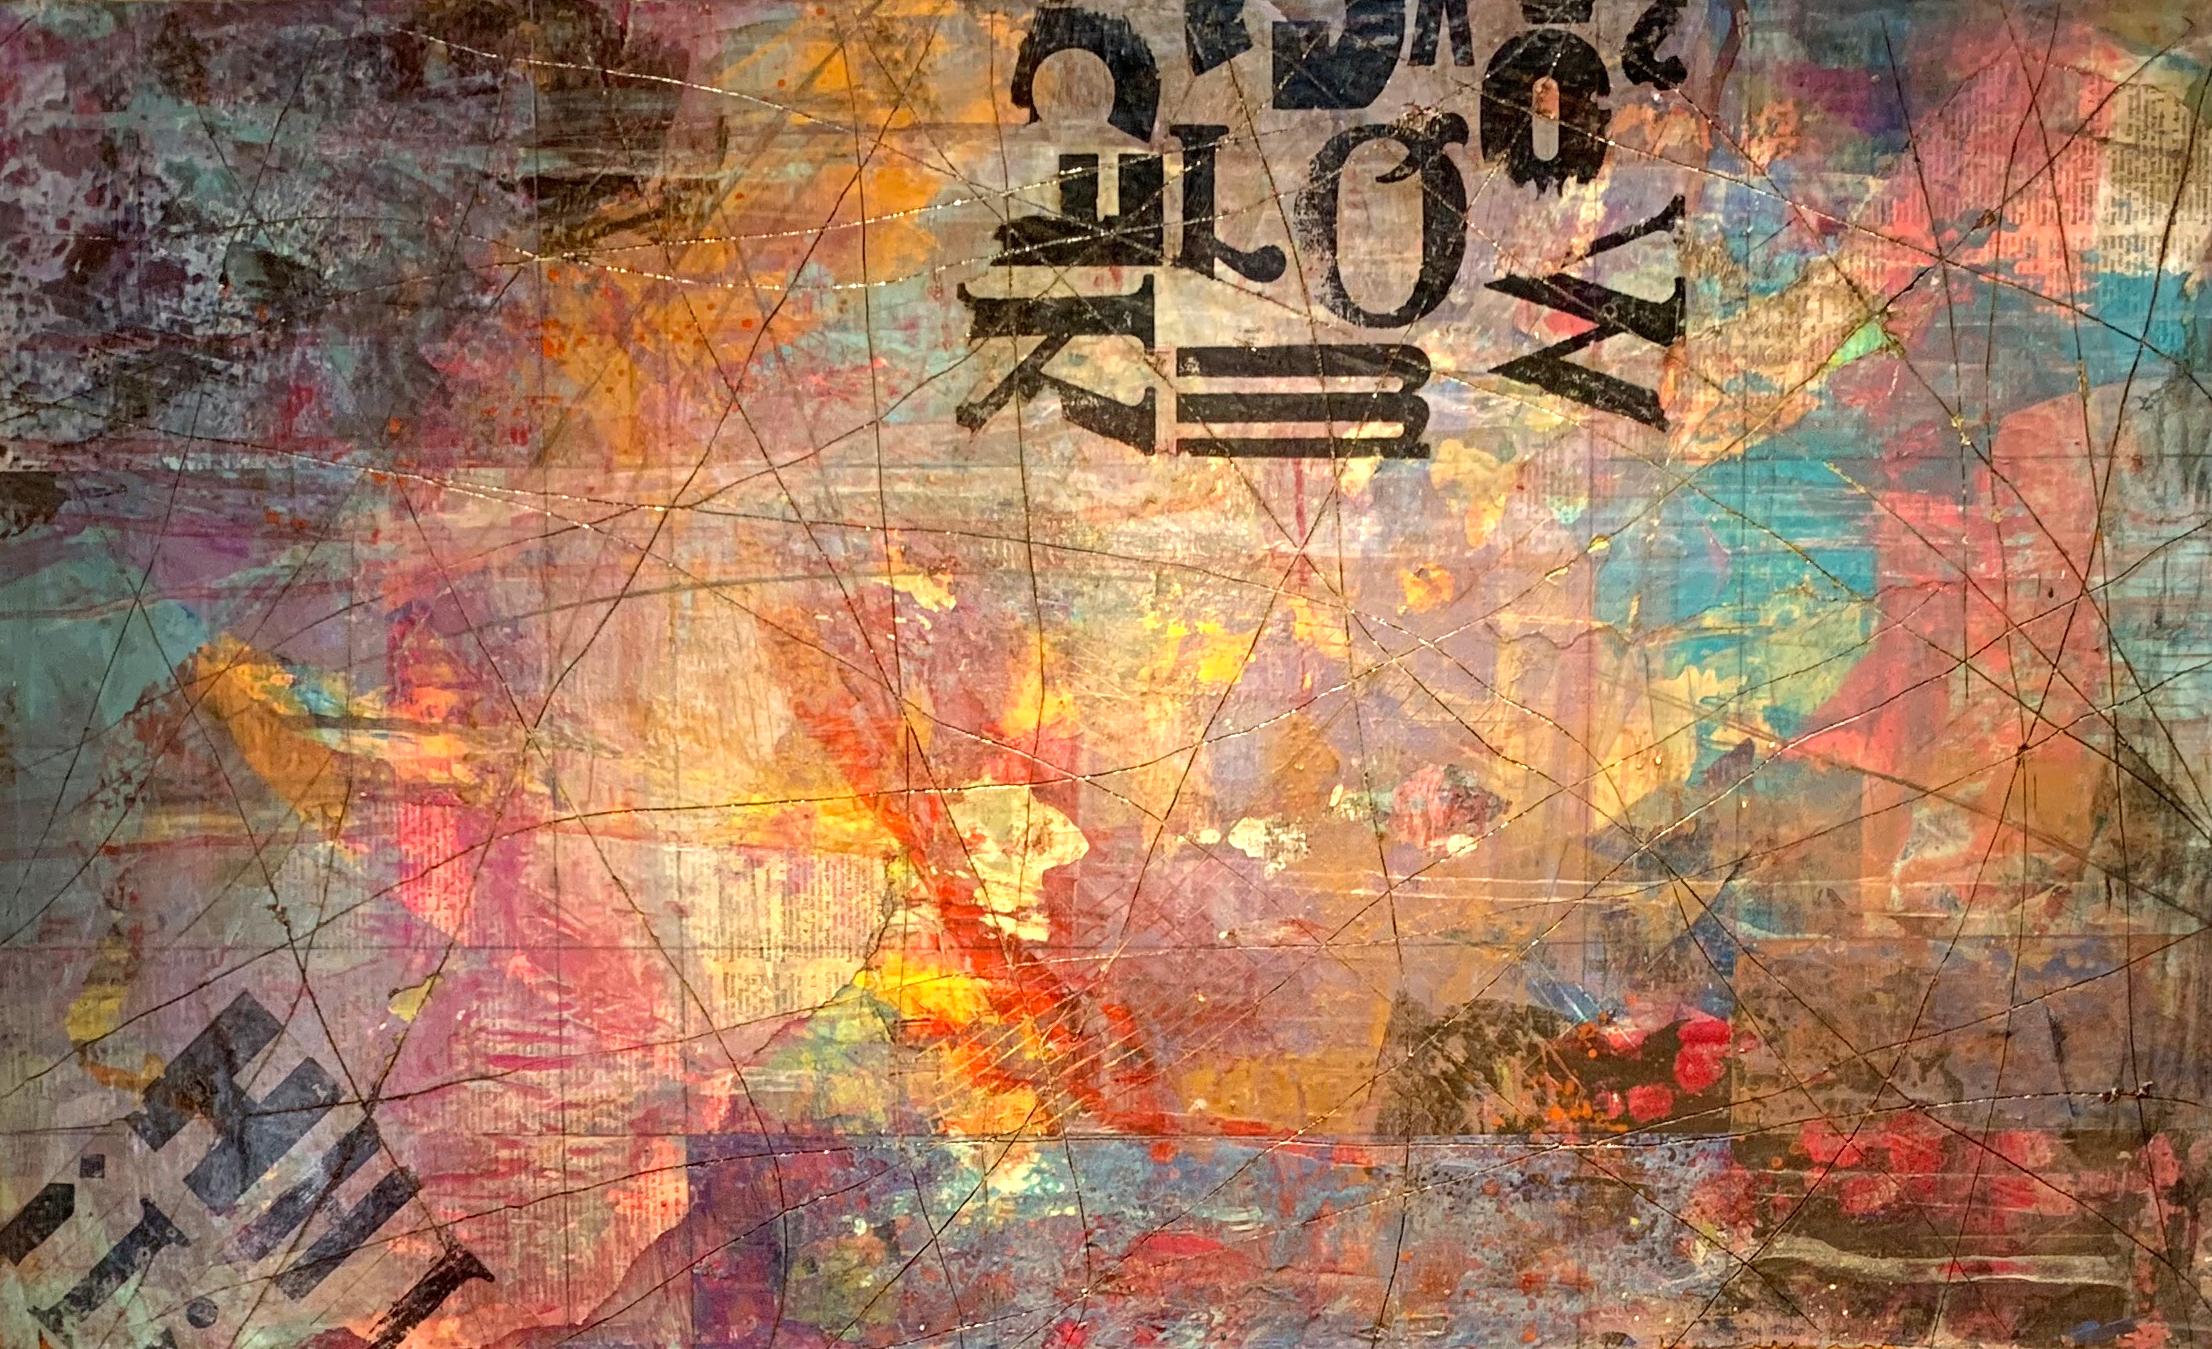 METAMORPHOSIS 11 & 12 Is a diptych, mixed media, acrylic, spray paint, ink, pencil markings, paper collage, on a custom wood box panel with a high gloss finish. Unframed.

David Samuels constructs visuals with sometimes a rustic weathered feel. They